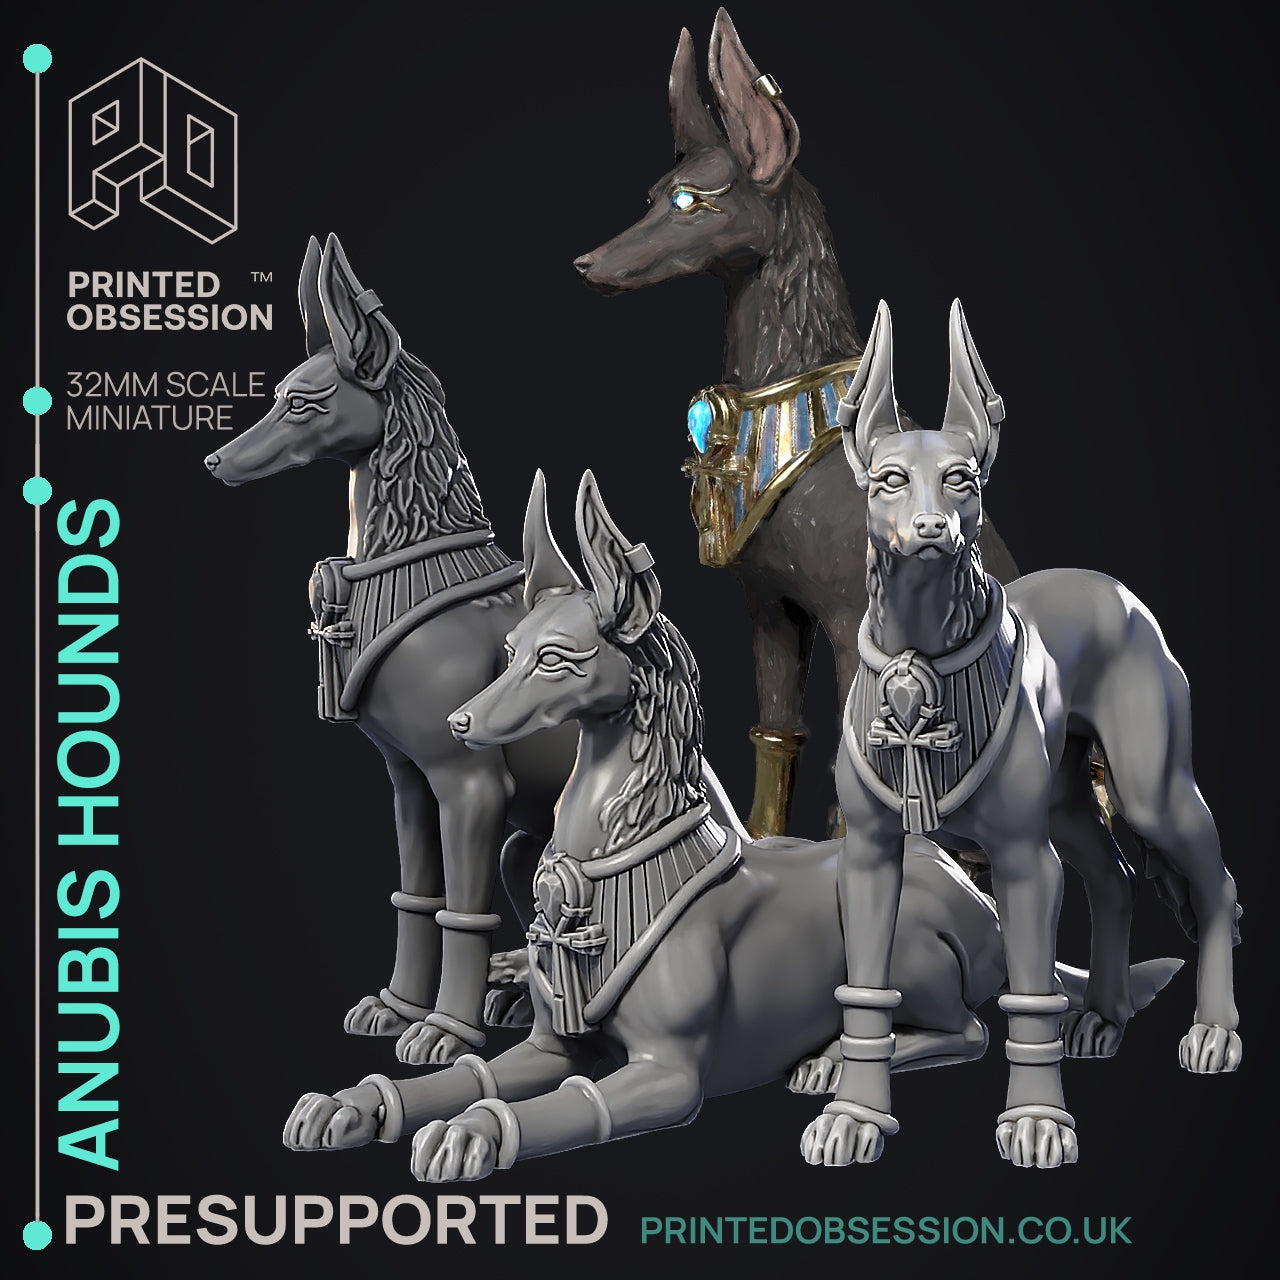 Anubis Hound - Court of Anubis - The Printed Obsession - Table-top mini, 3D Printed Collectable for painting and playing!